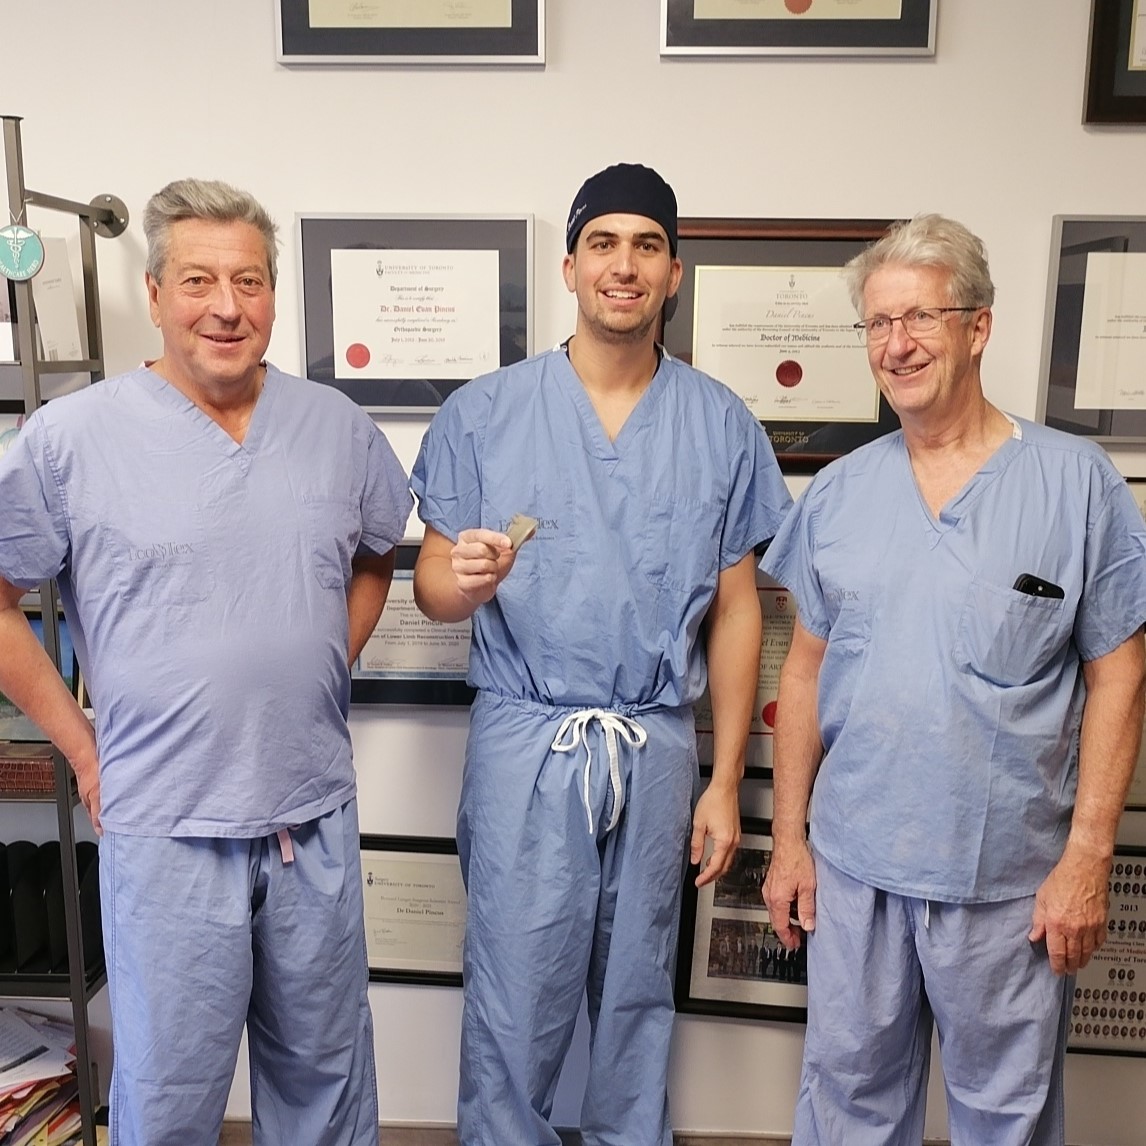 We are thrilled to announce that the first Polymotion® Hip Resurfacing (PHR®)* procedure in Ontario, Canada was successfully performed last month! The surgery was part of a training event aimed at introducing surgeons to the cutting-edge PHR® system. The event and procedure were